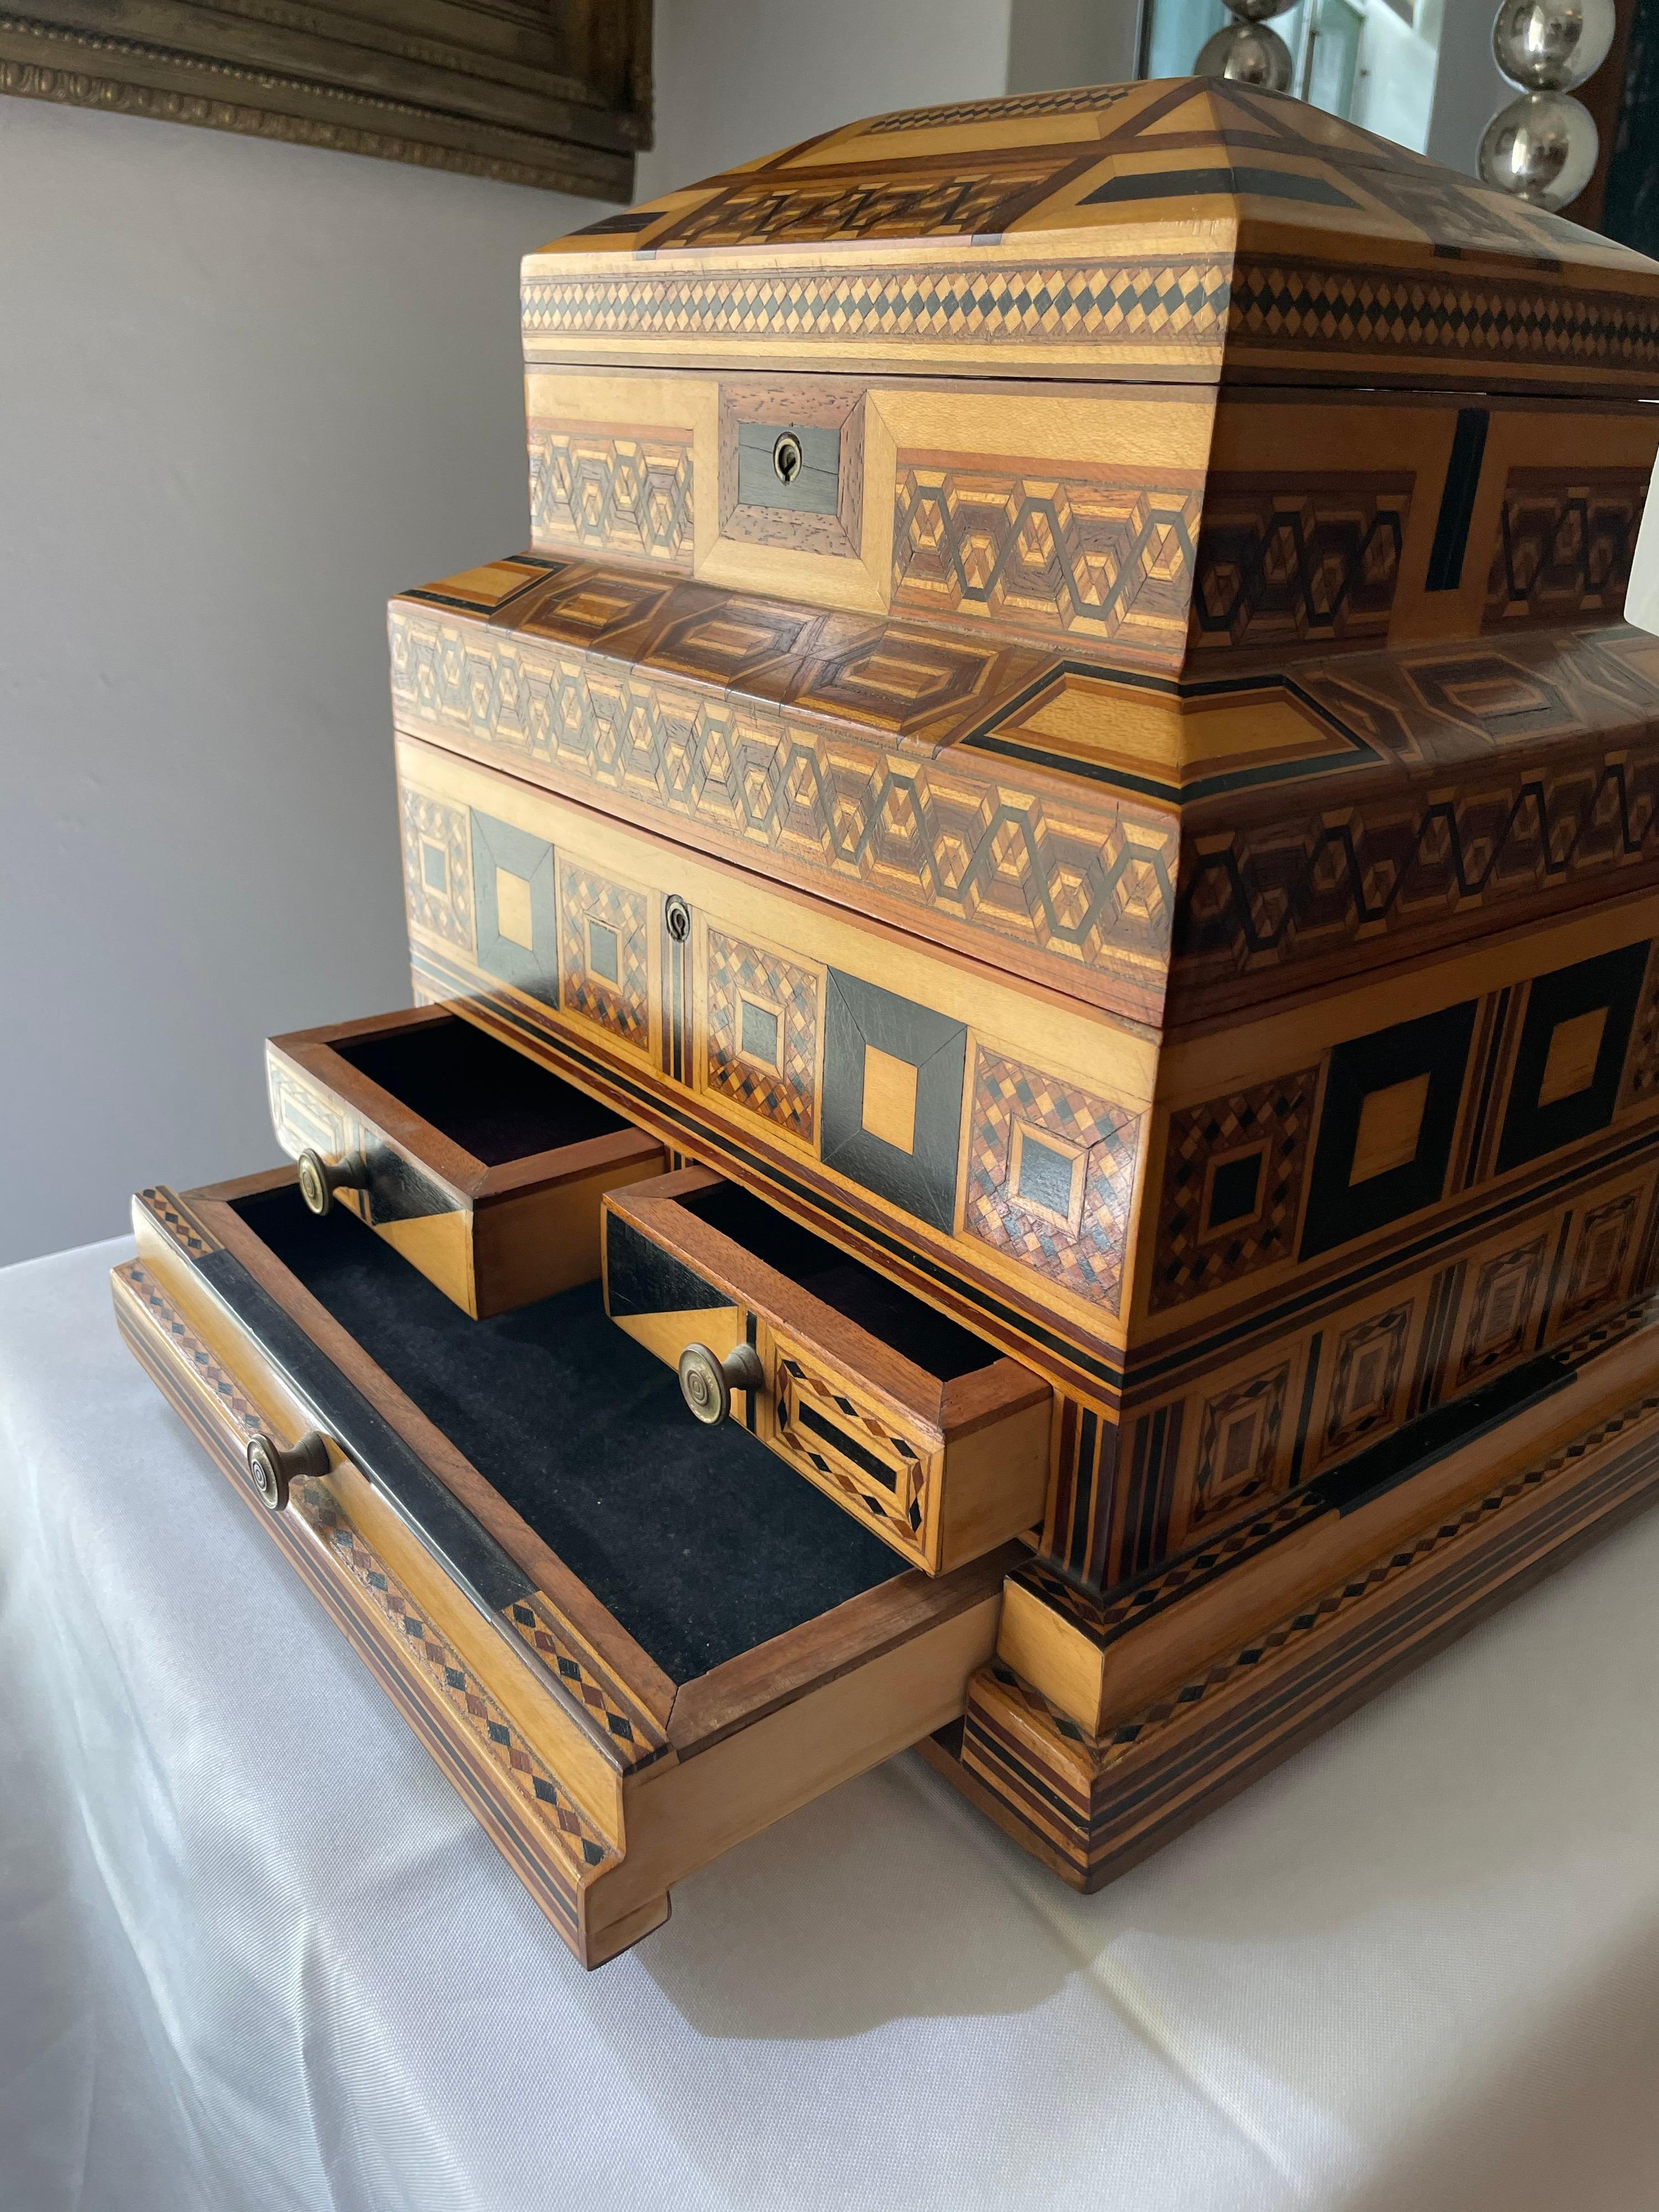 1900s Prisoner-Made Marquetry Inlay Wood Box in Masonic Temple Design 8